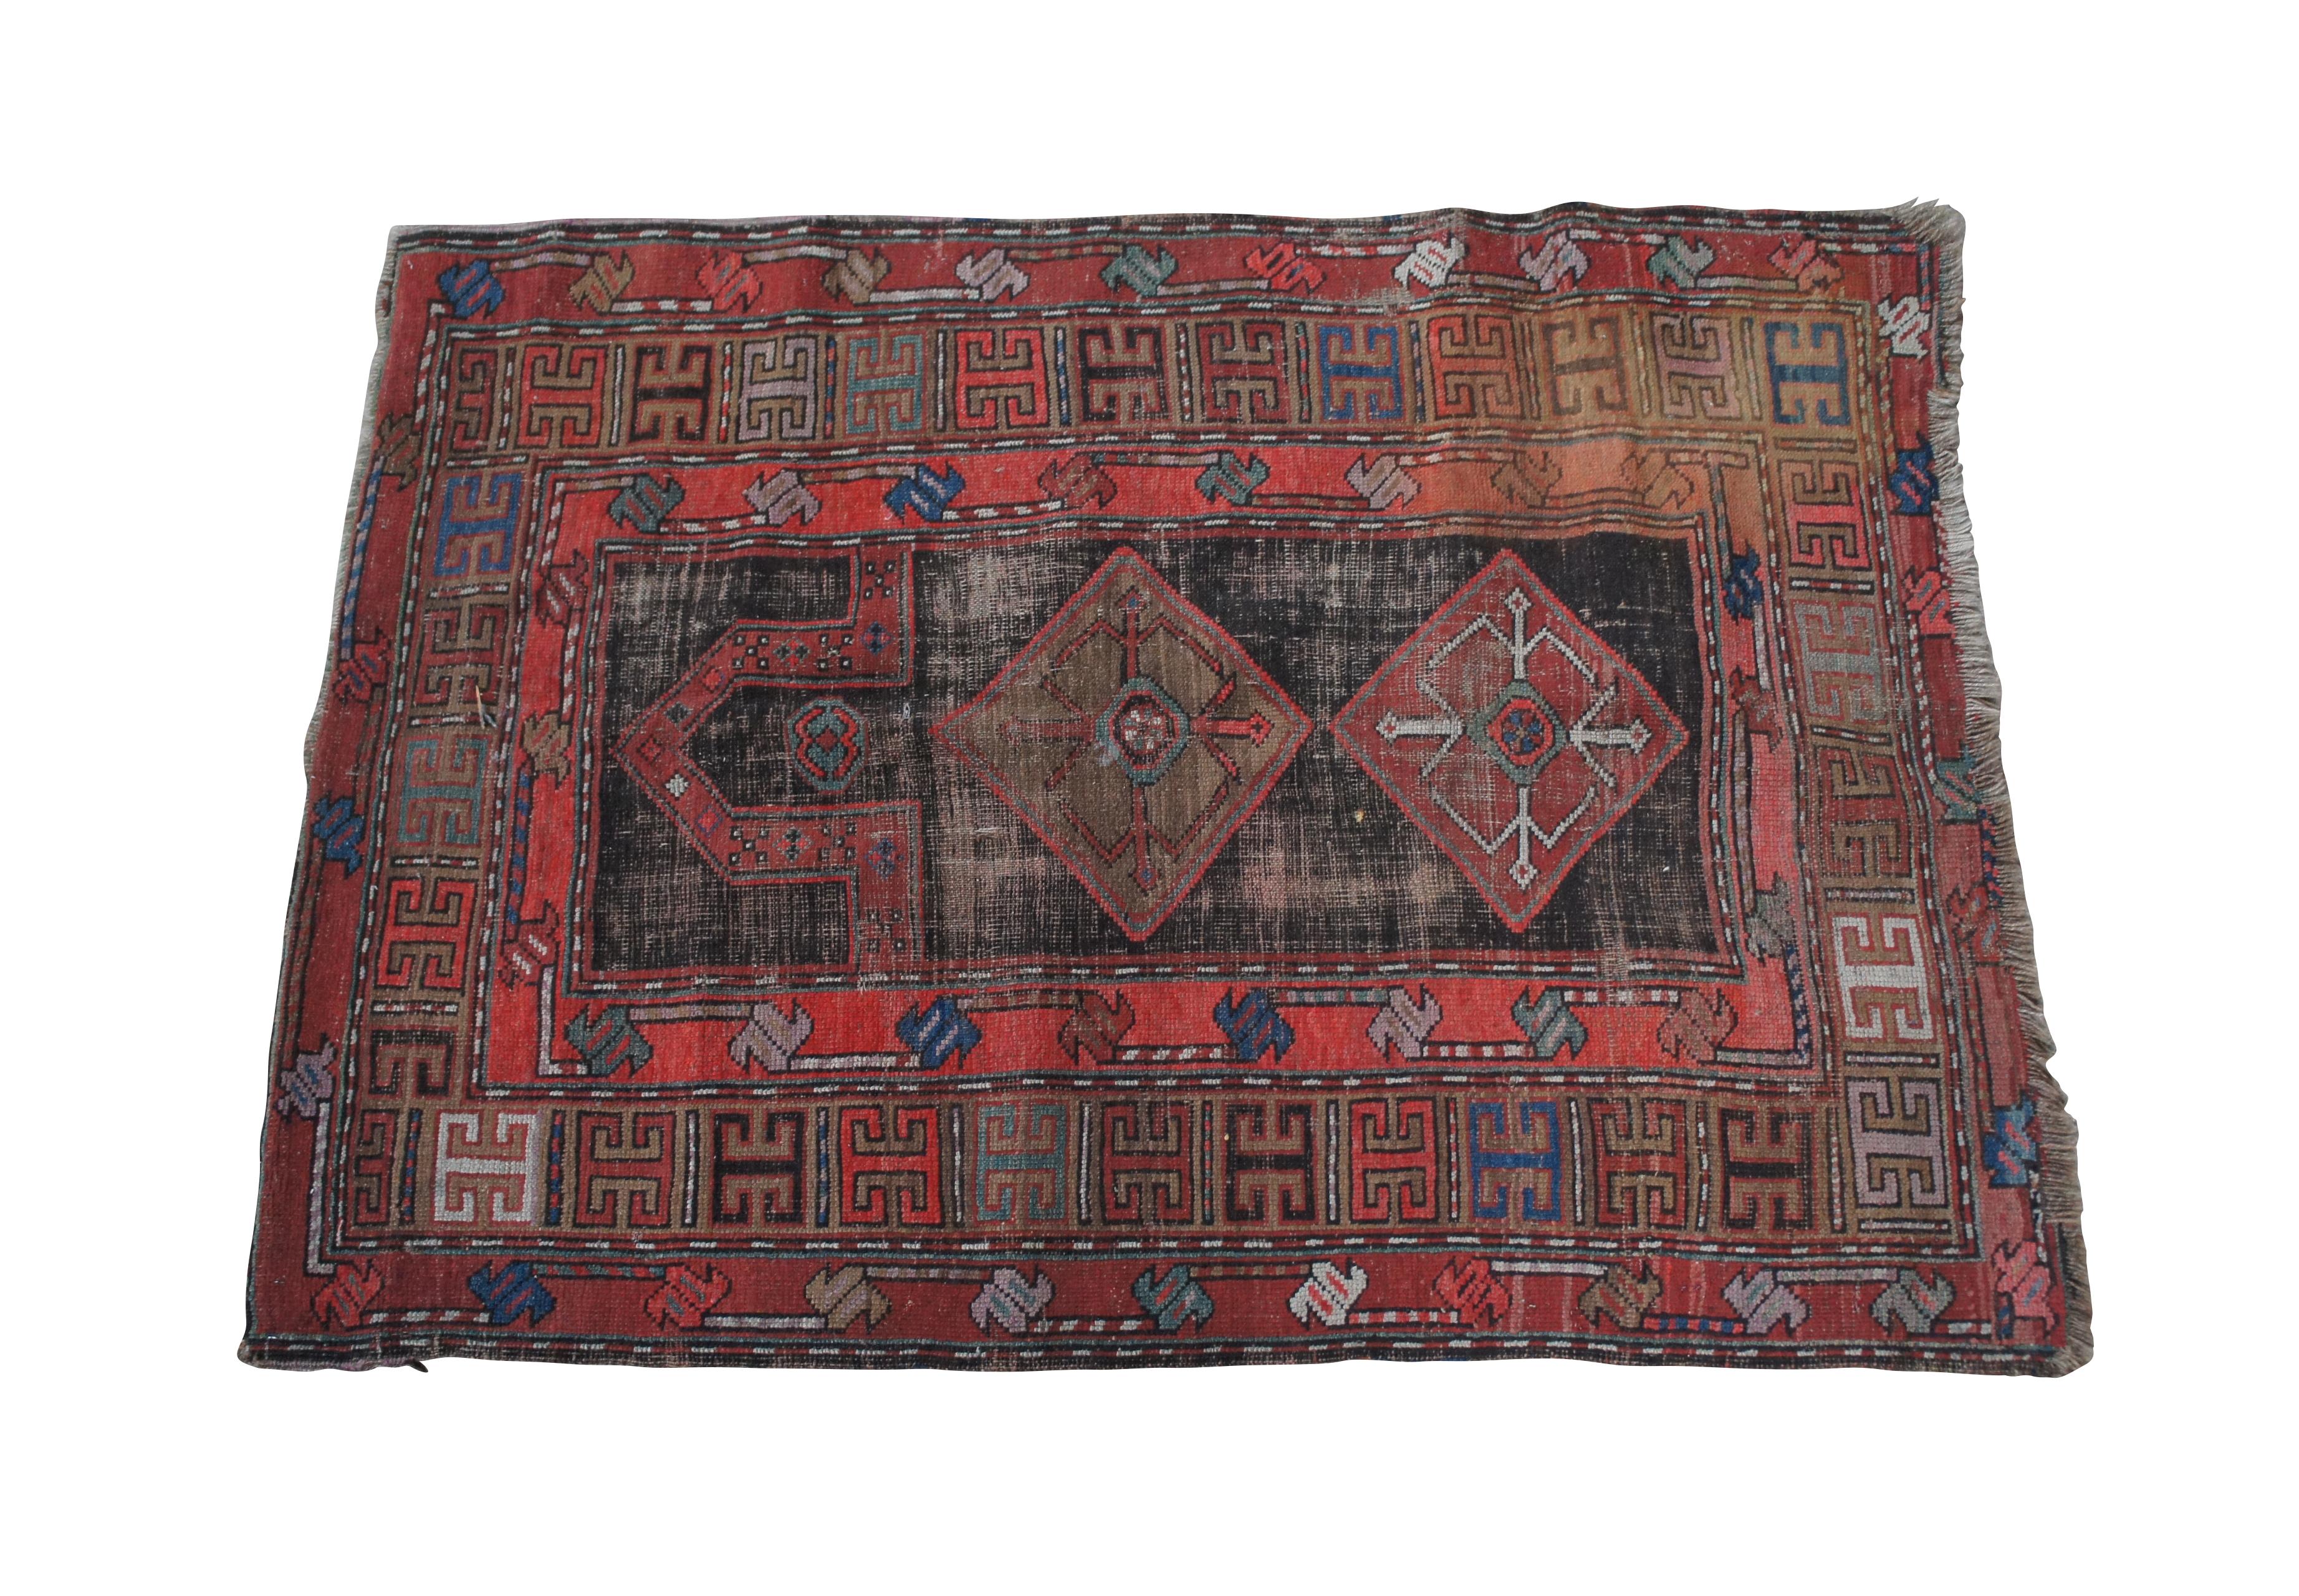 Antique Hand Woven South Caucasian Red & Blue wool prayer rug from Karabagh, circa 1900-1920.  Features a diamond geometric field with framed in alternating color # signs. 3'3